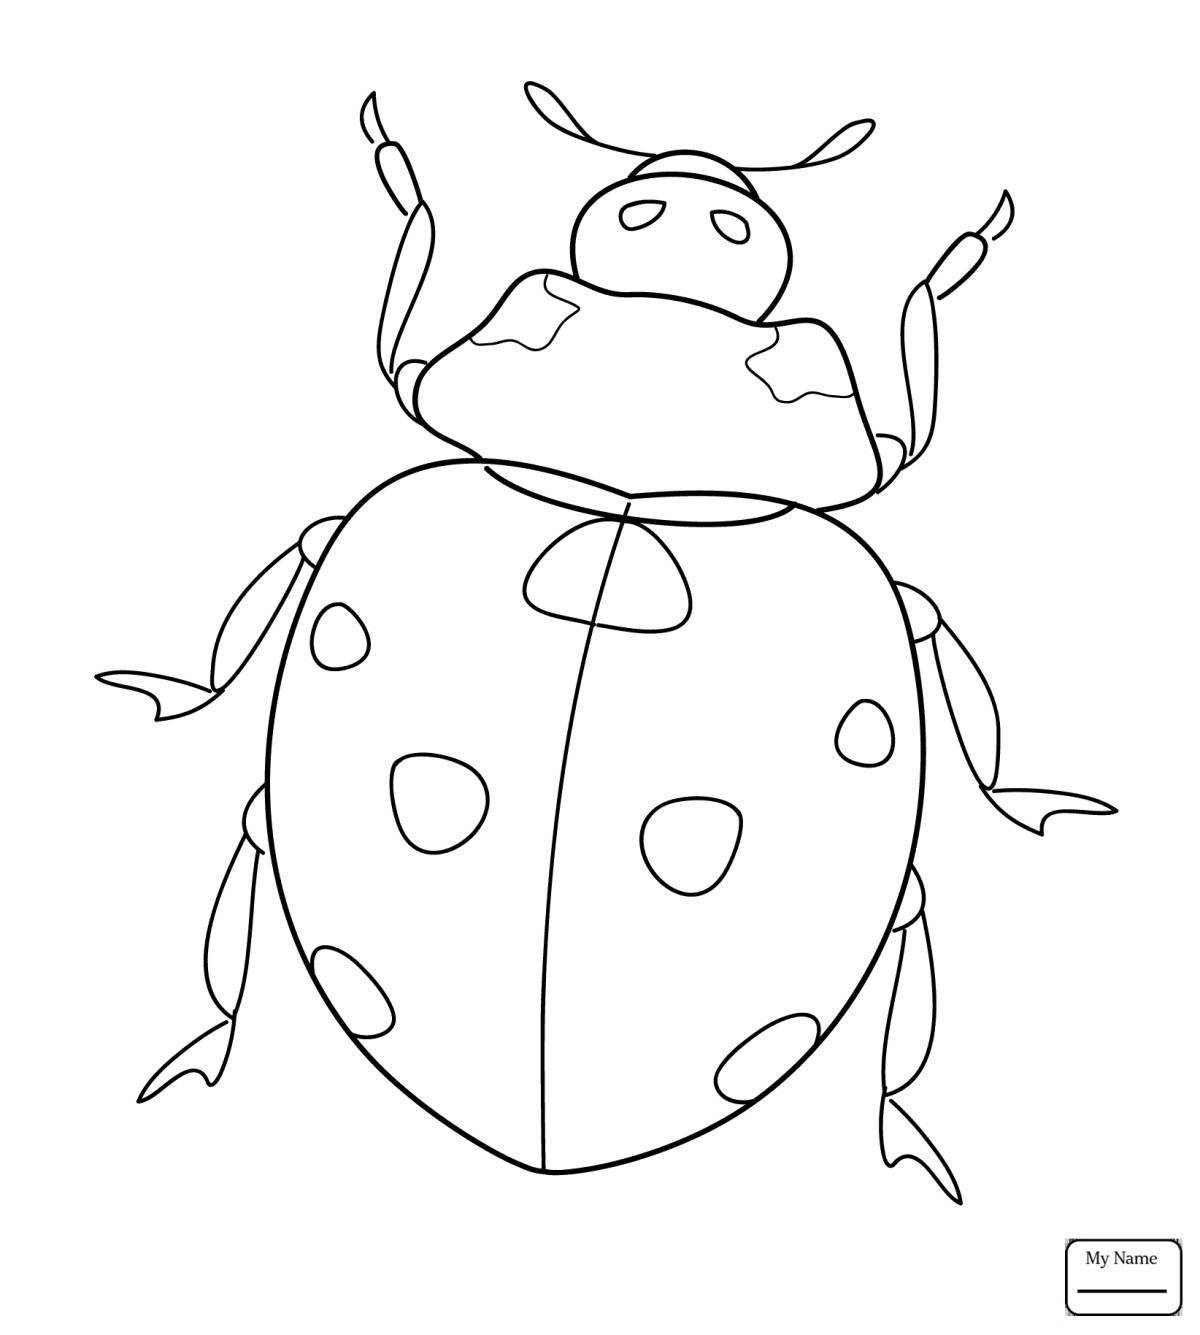 Colourful beetle coloring book for 3-4 year olds